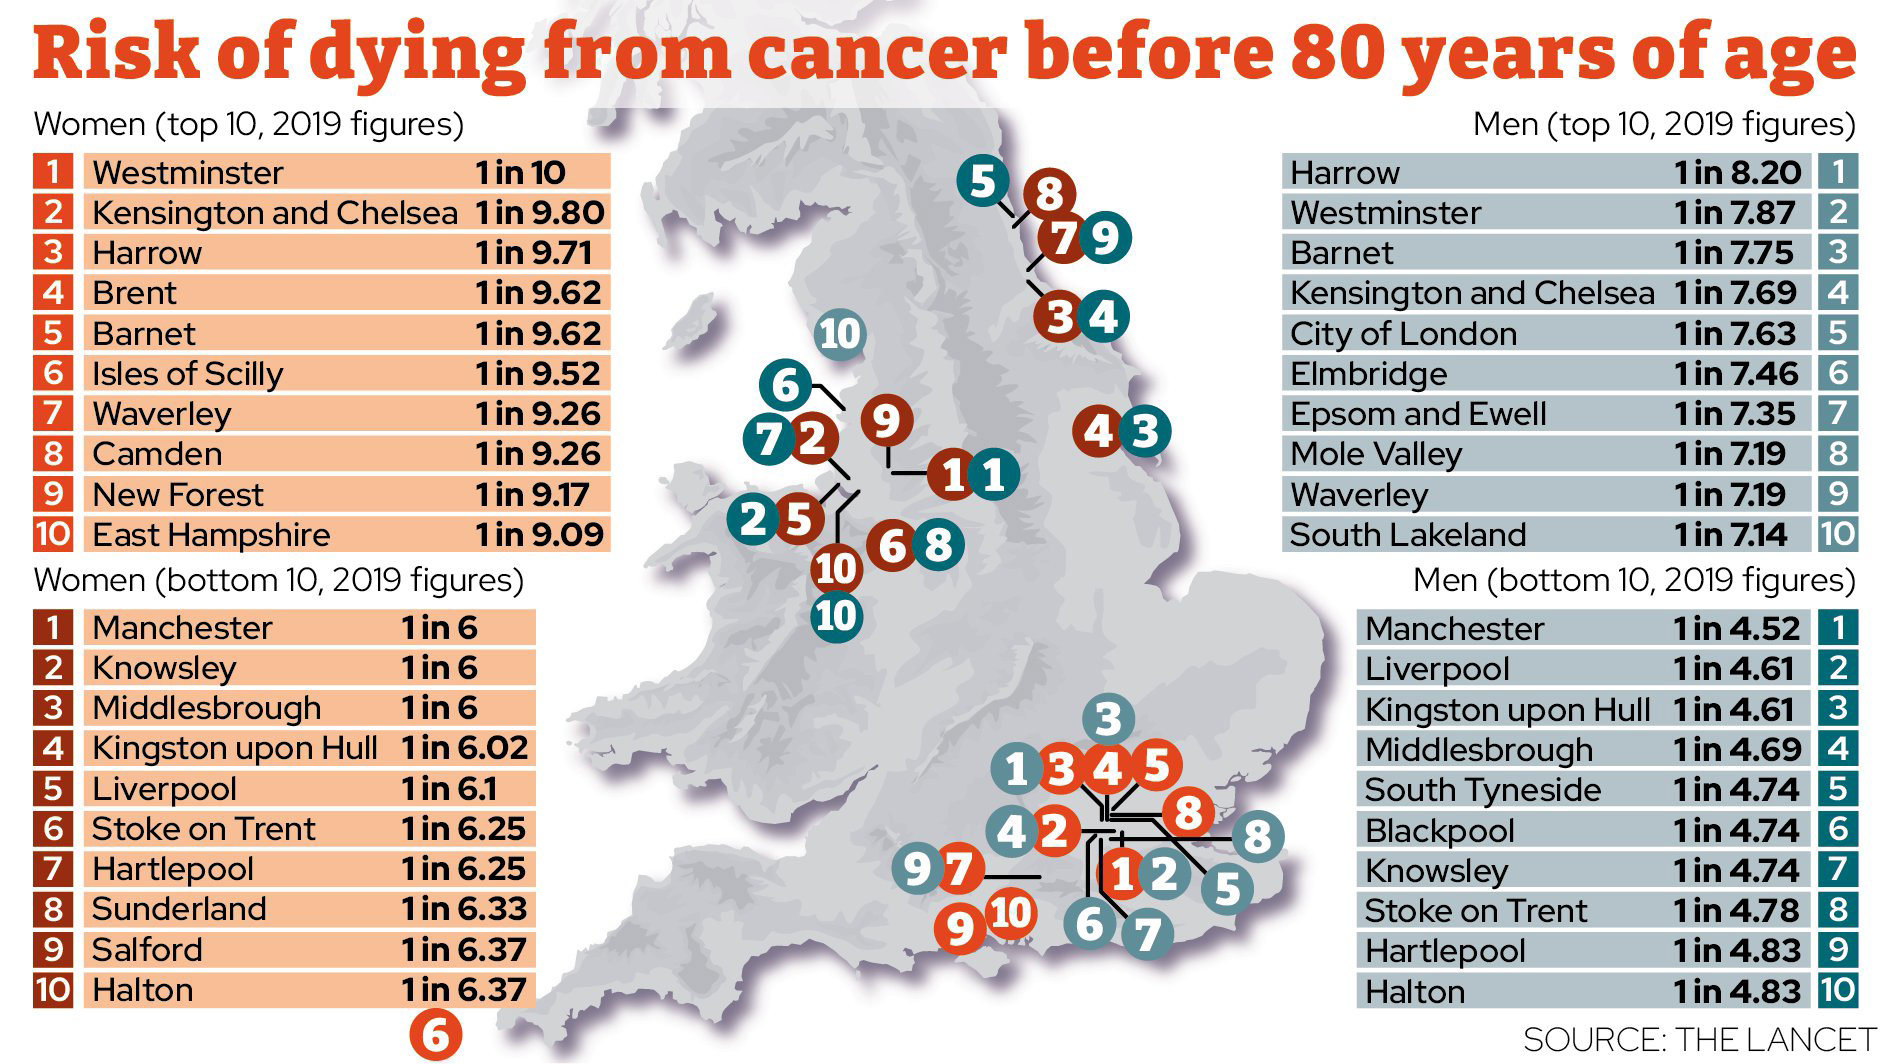 ‘Astounding inequality’ in North-South cancer death divide